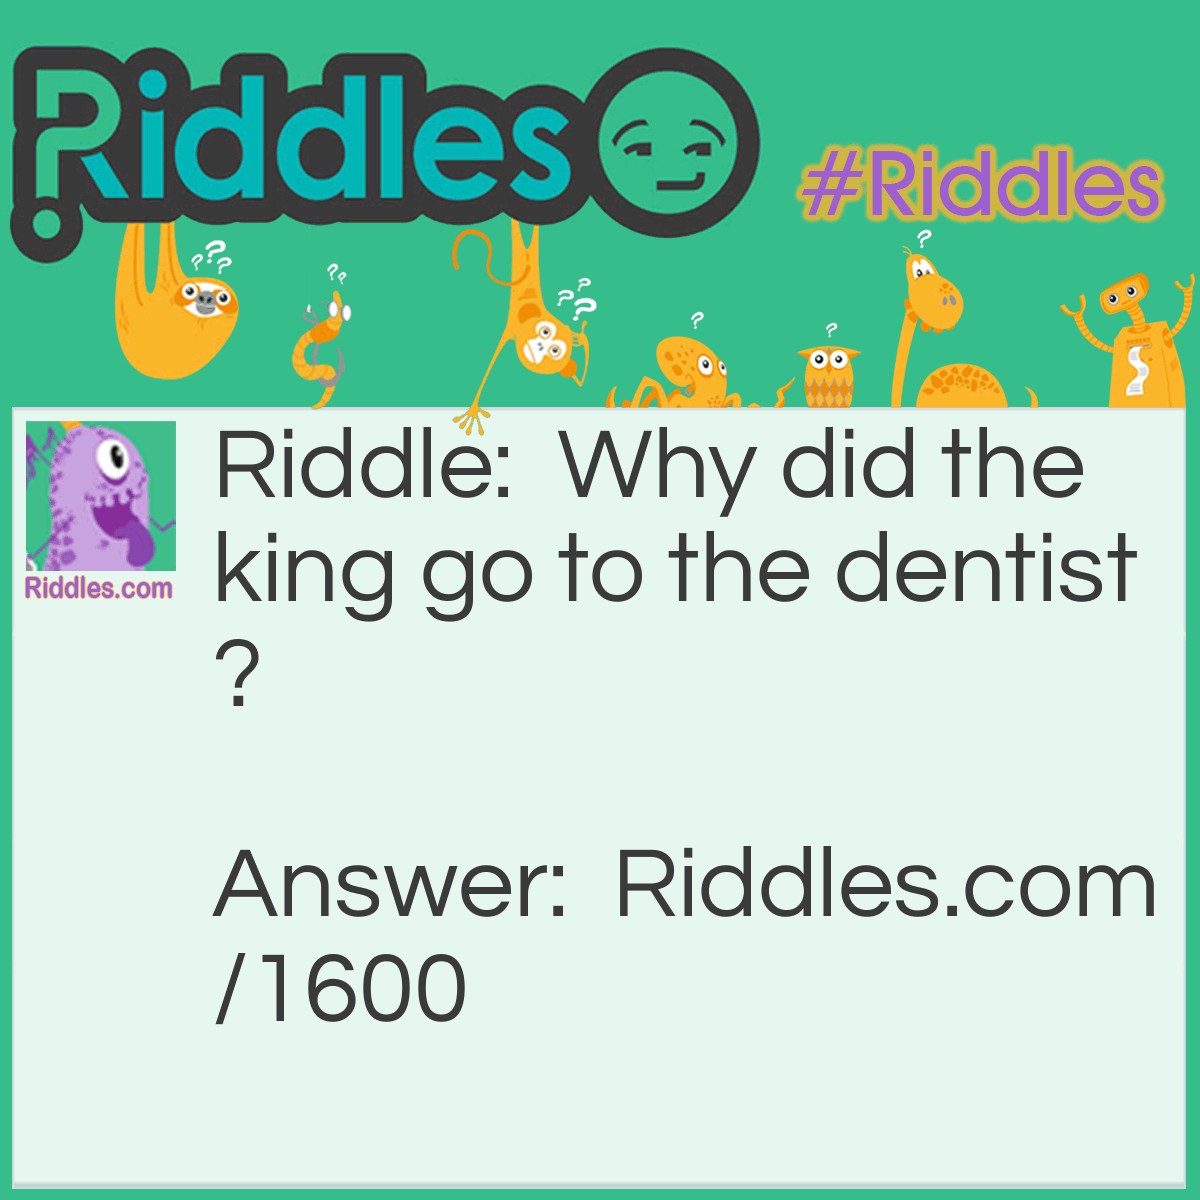 Riddle: Why did the king go to the dentist? Answer: To get a new crown.